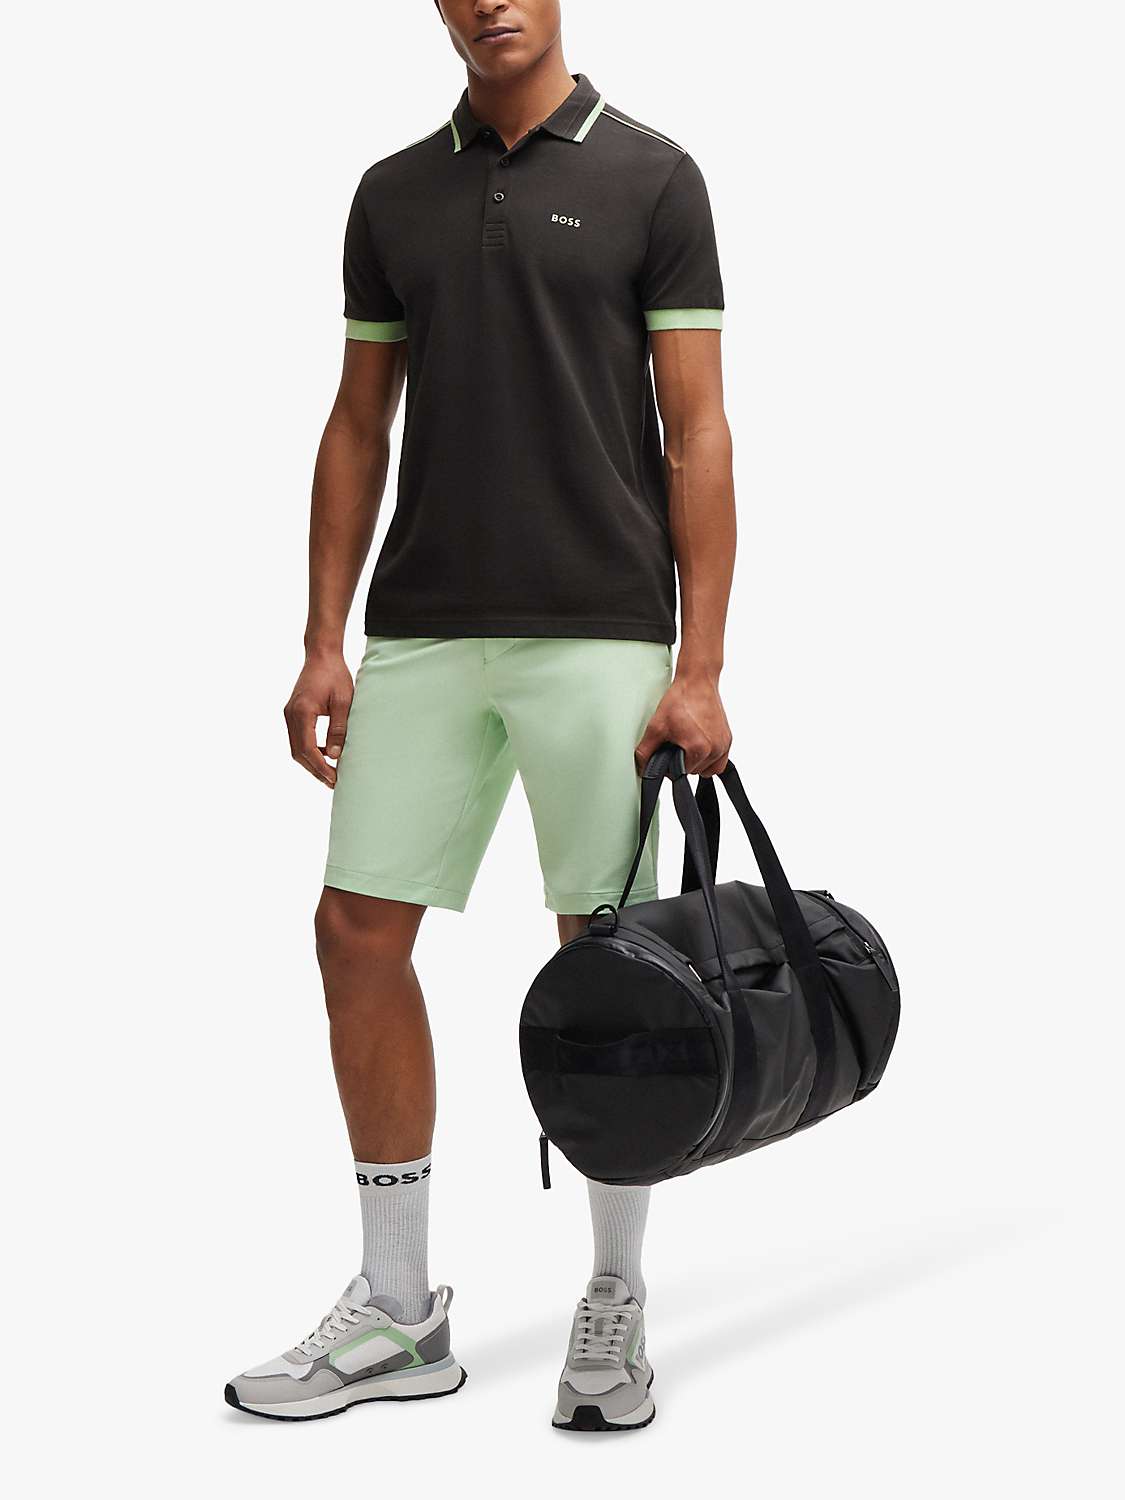 Buy BOSS Paddy 016 Short Sleeve Polo Shirt, Charcoal Online at johnlewis.com